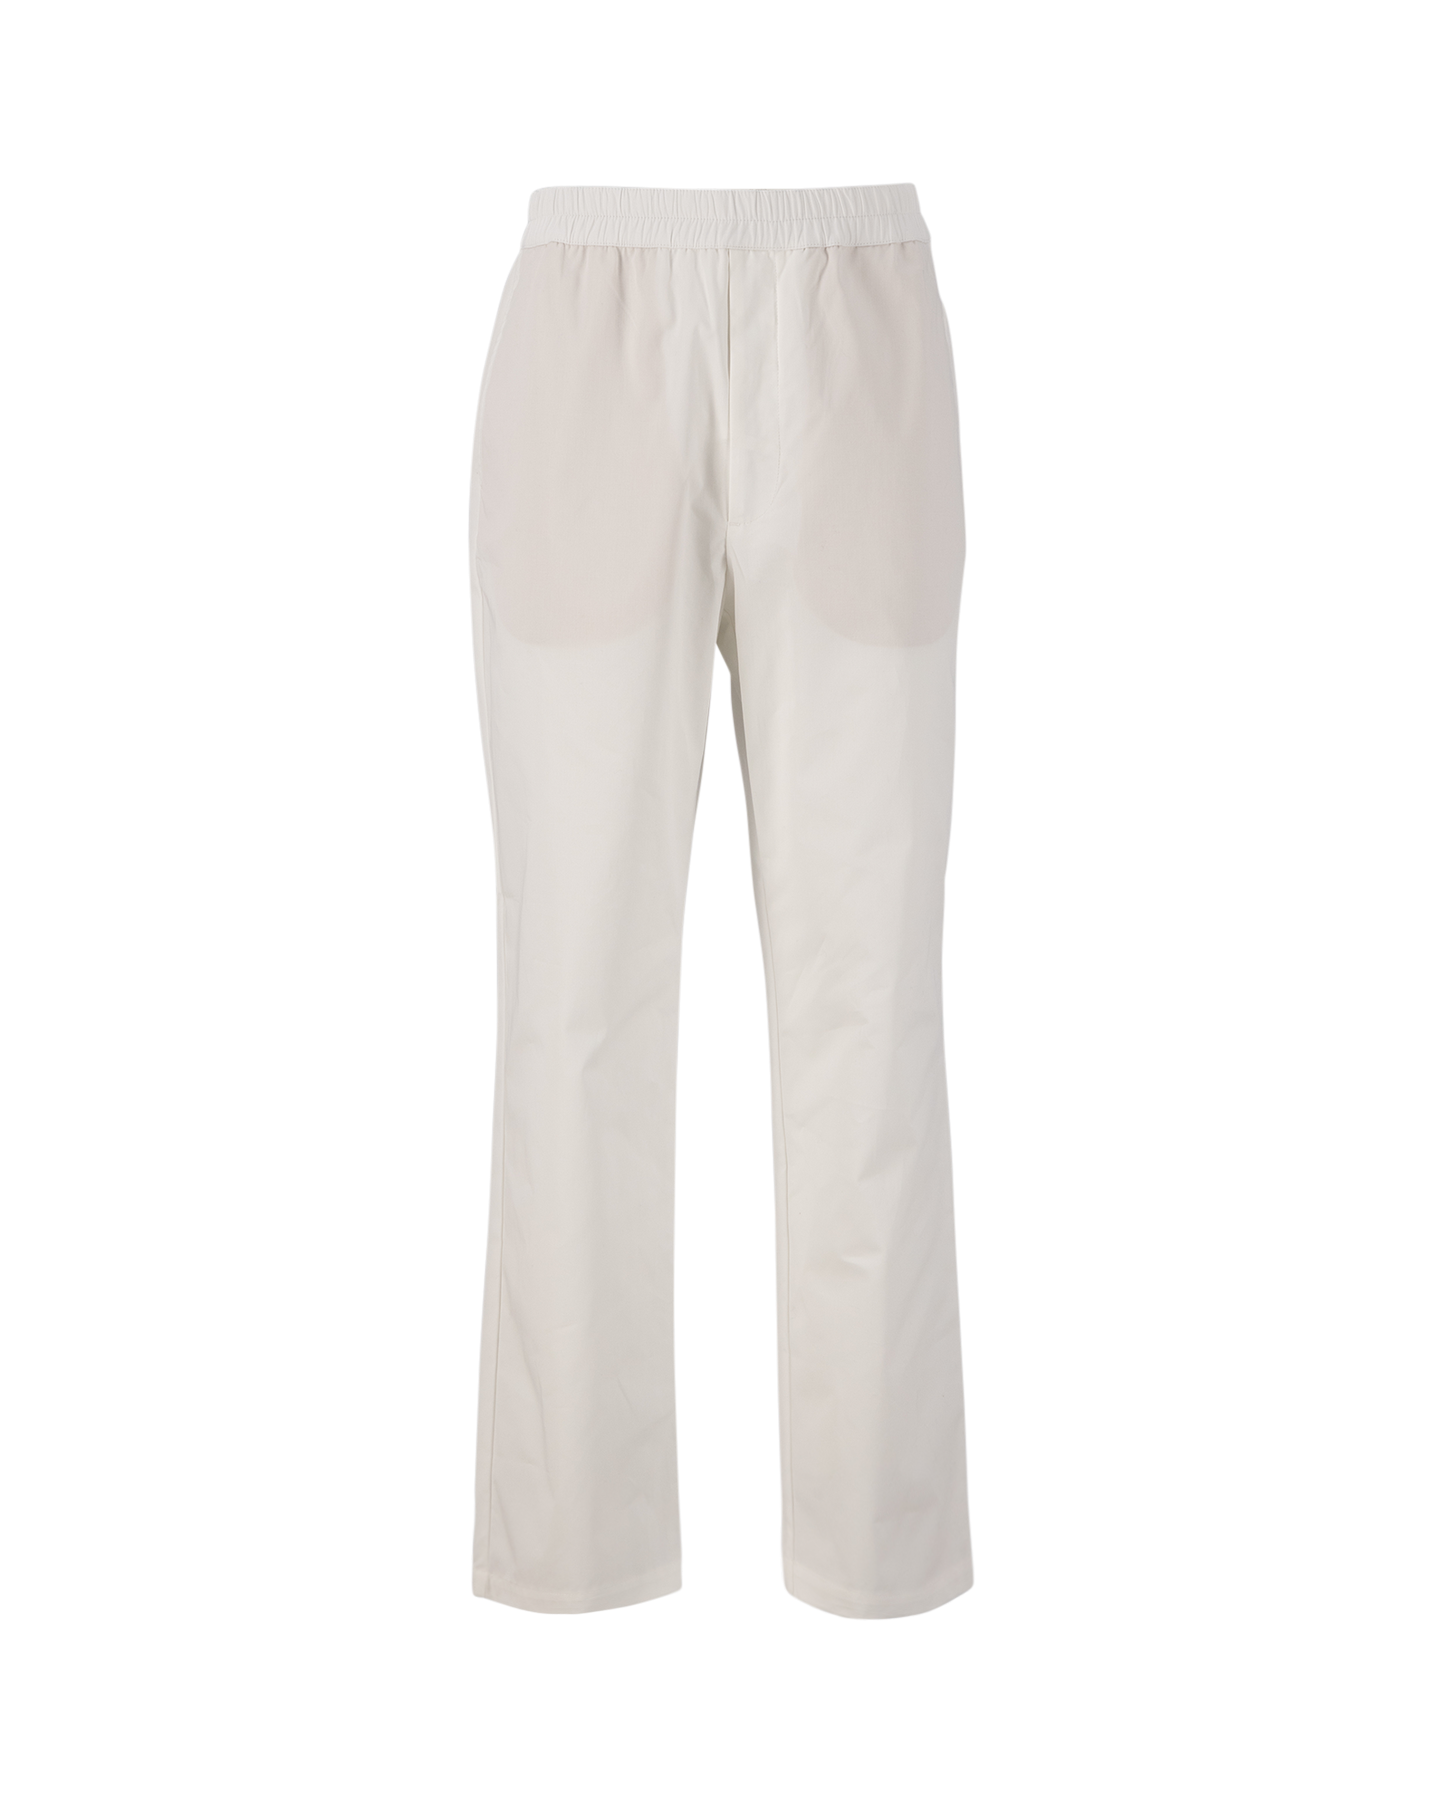 Róhe Relaxed Fit Trousers OFFWHITE 1